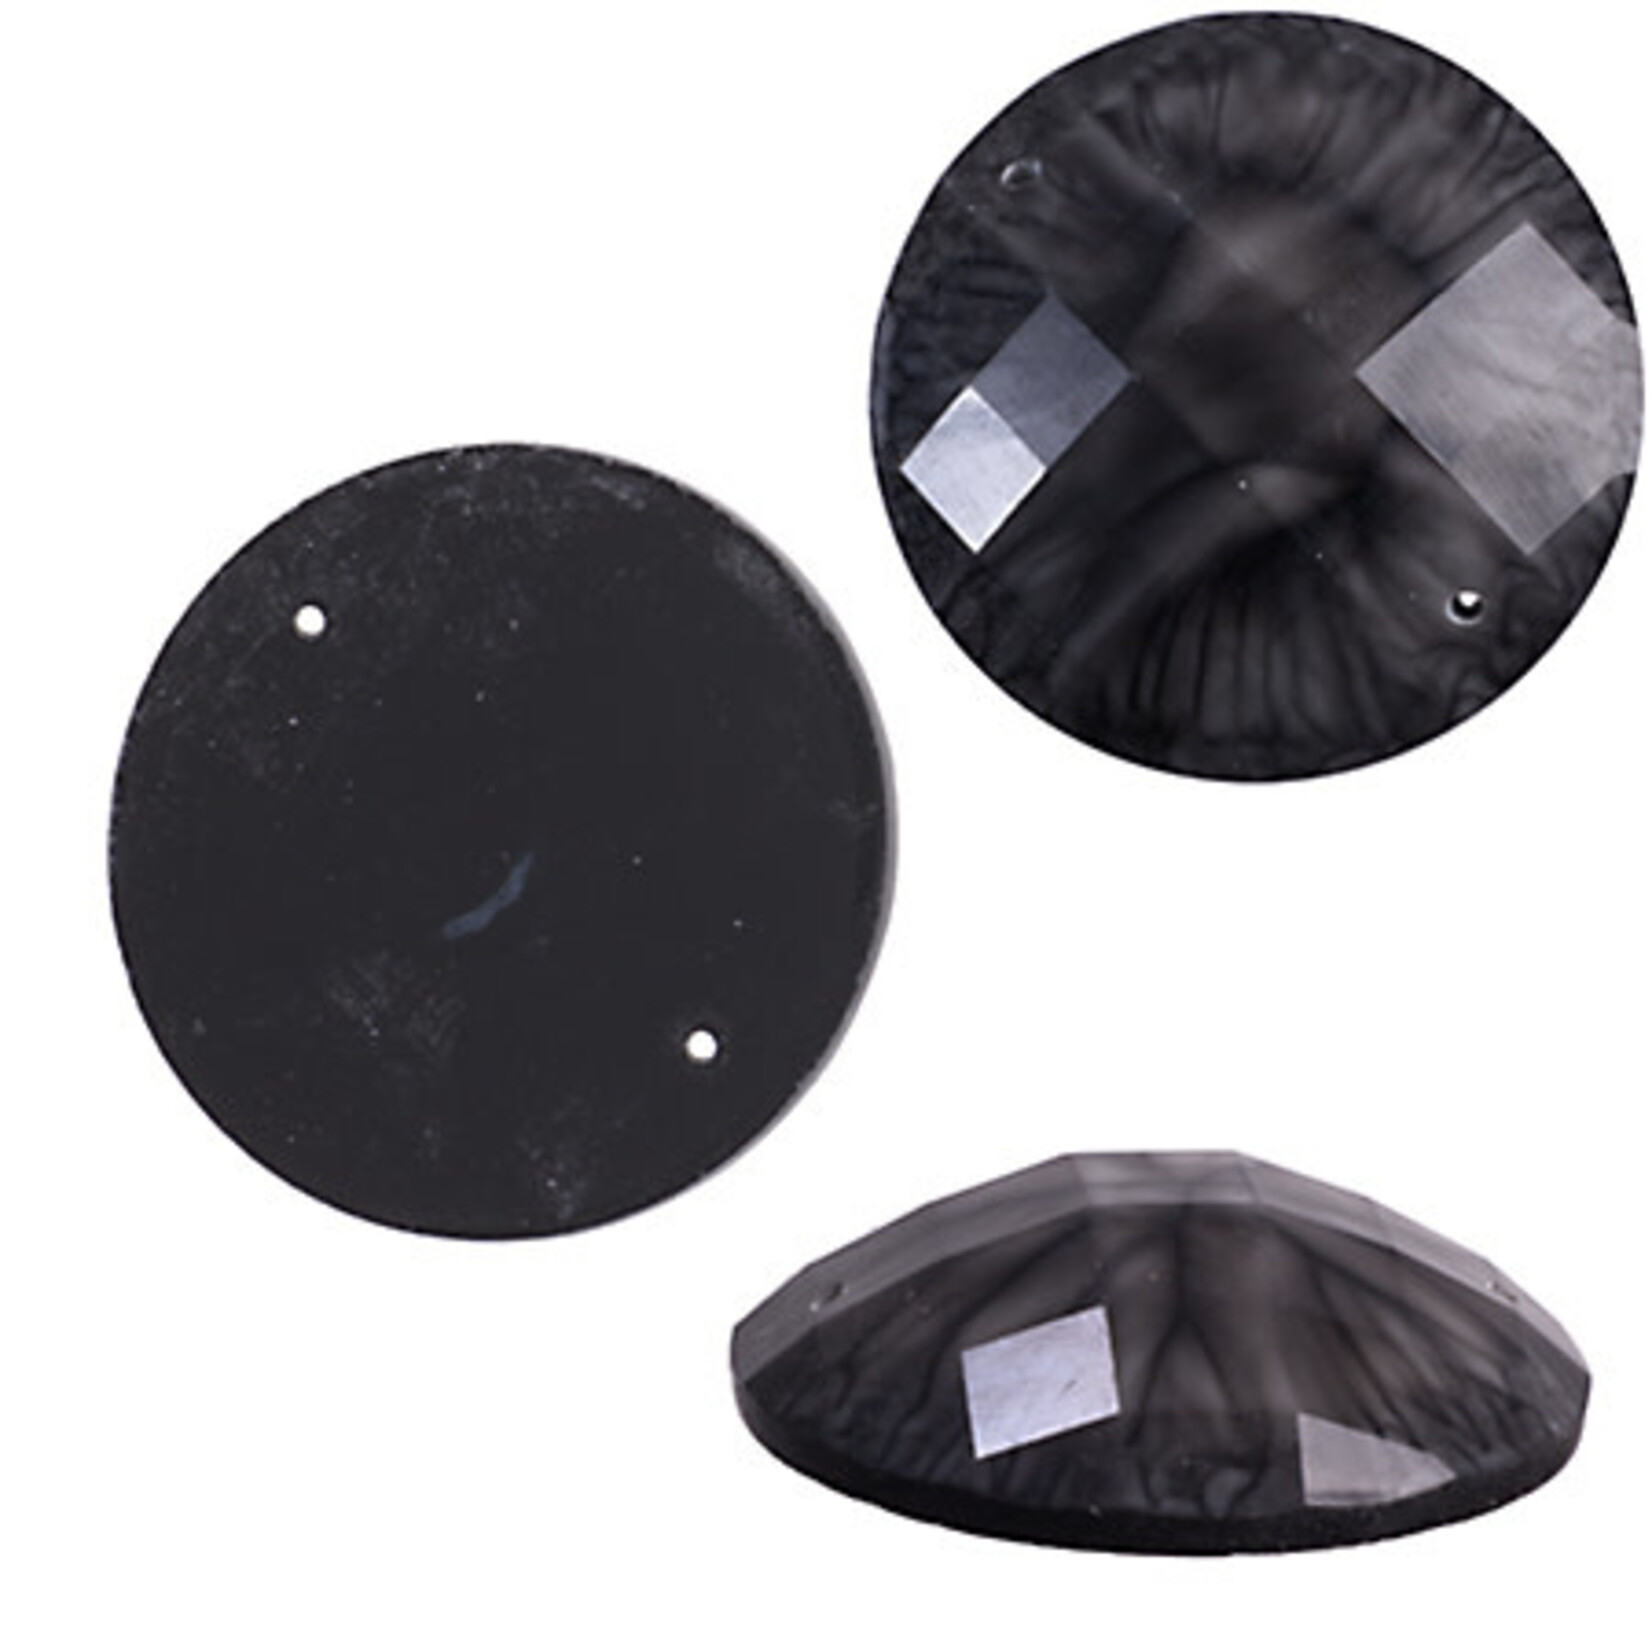 Resin Sew-on Crinkle Stone 34mm Round (10 Pieces)